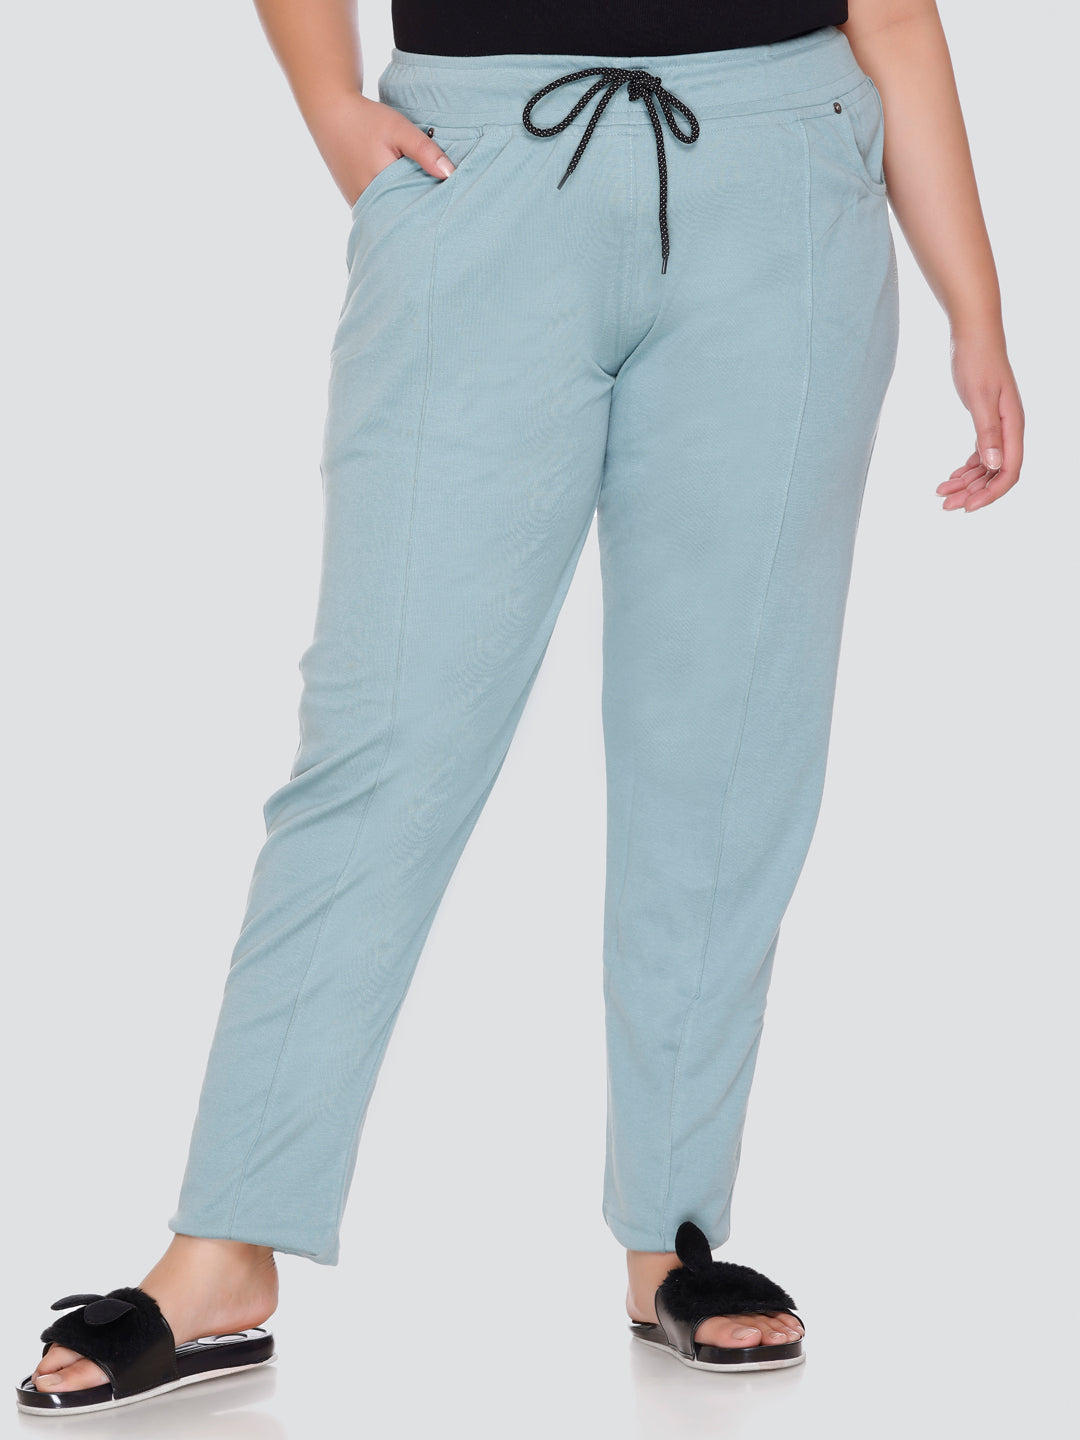 Buy Green Track Pants for Women by LEVIS Online | Ajio.com